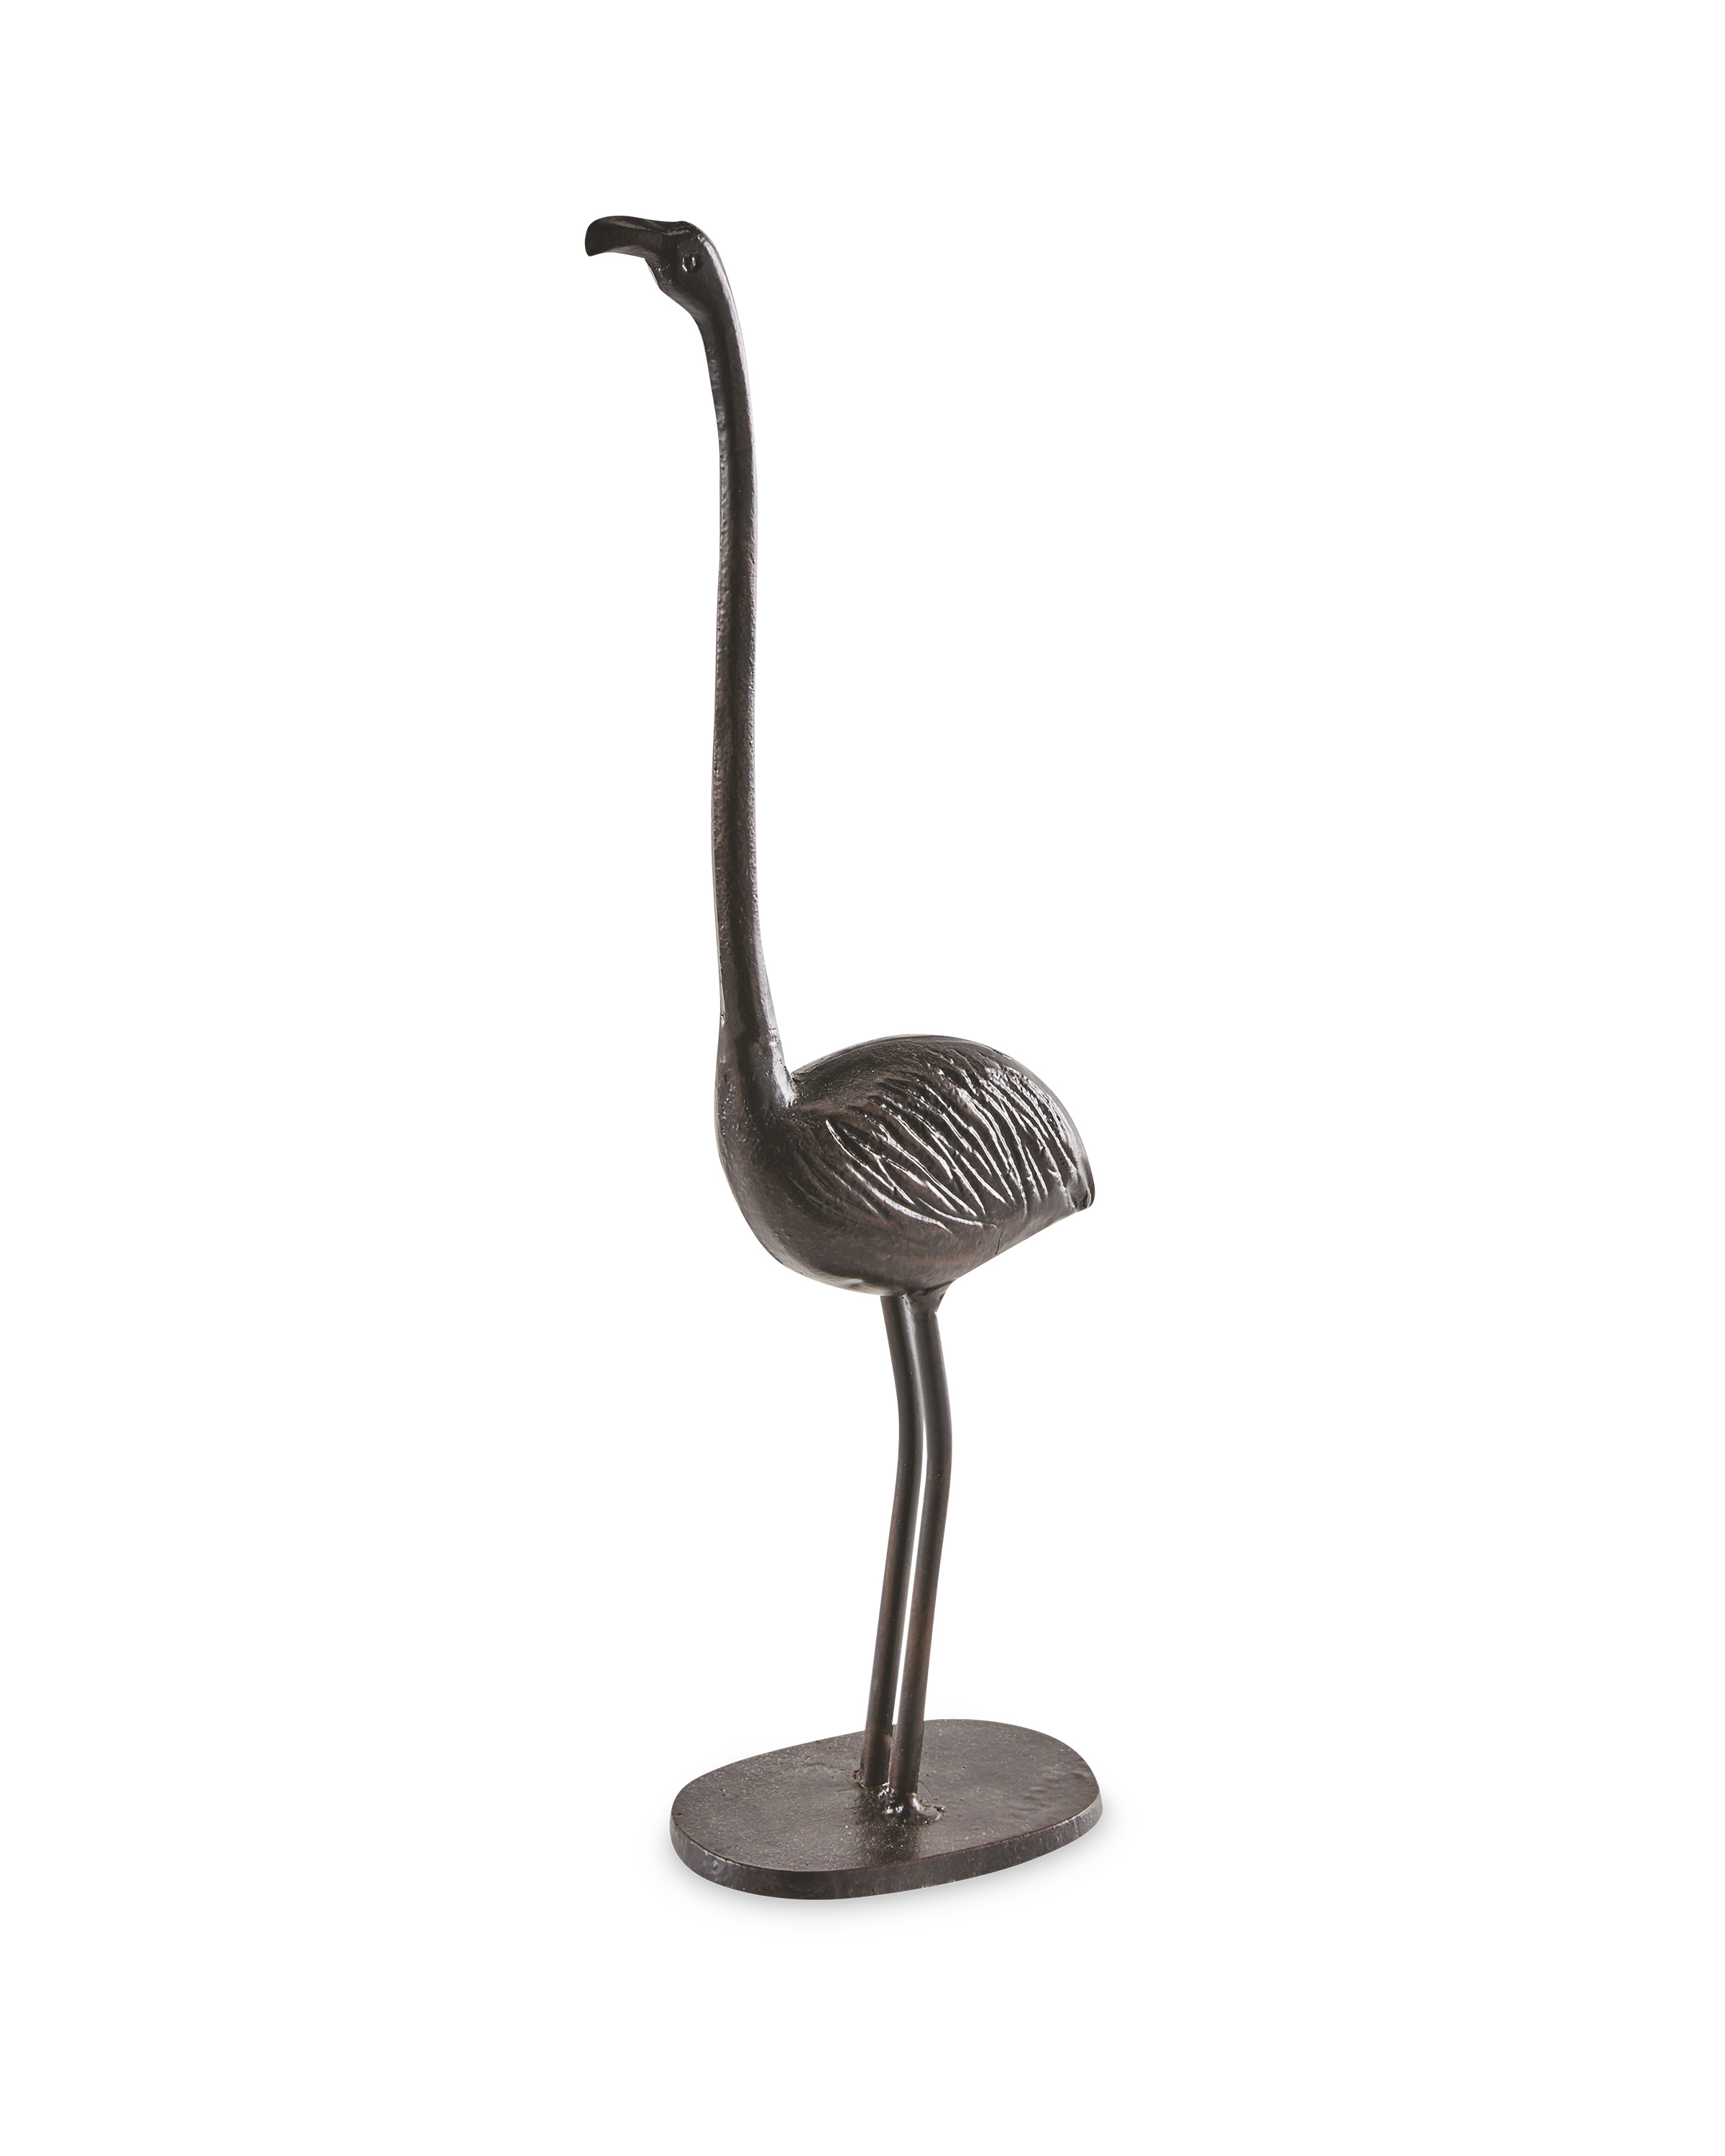 Featured image of post Giraffe Toilet Roll Holder Aldi - Chrome stainless steel toilet loo roll holder bathroom storage free standing new.